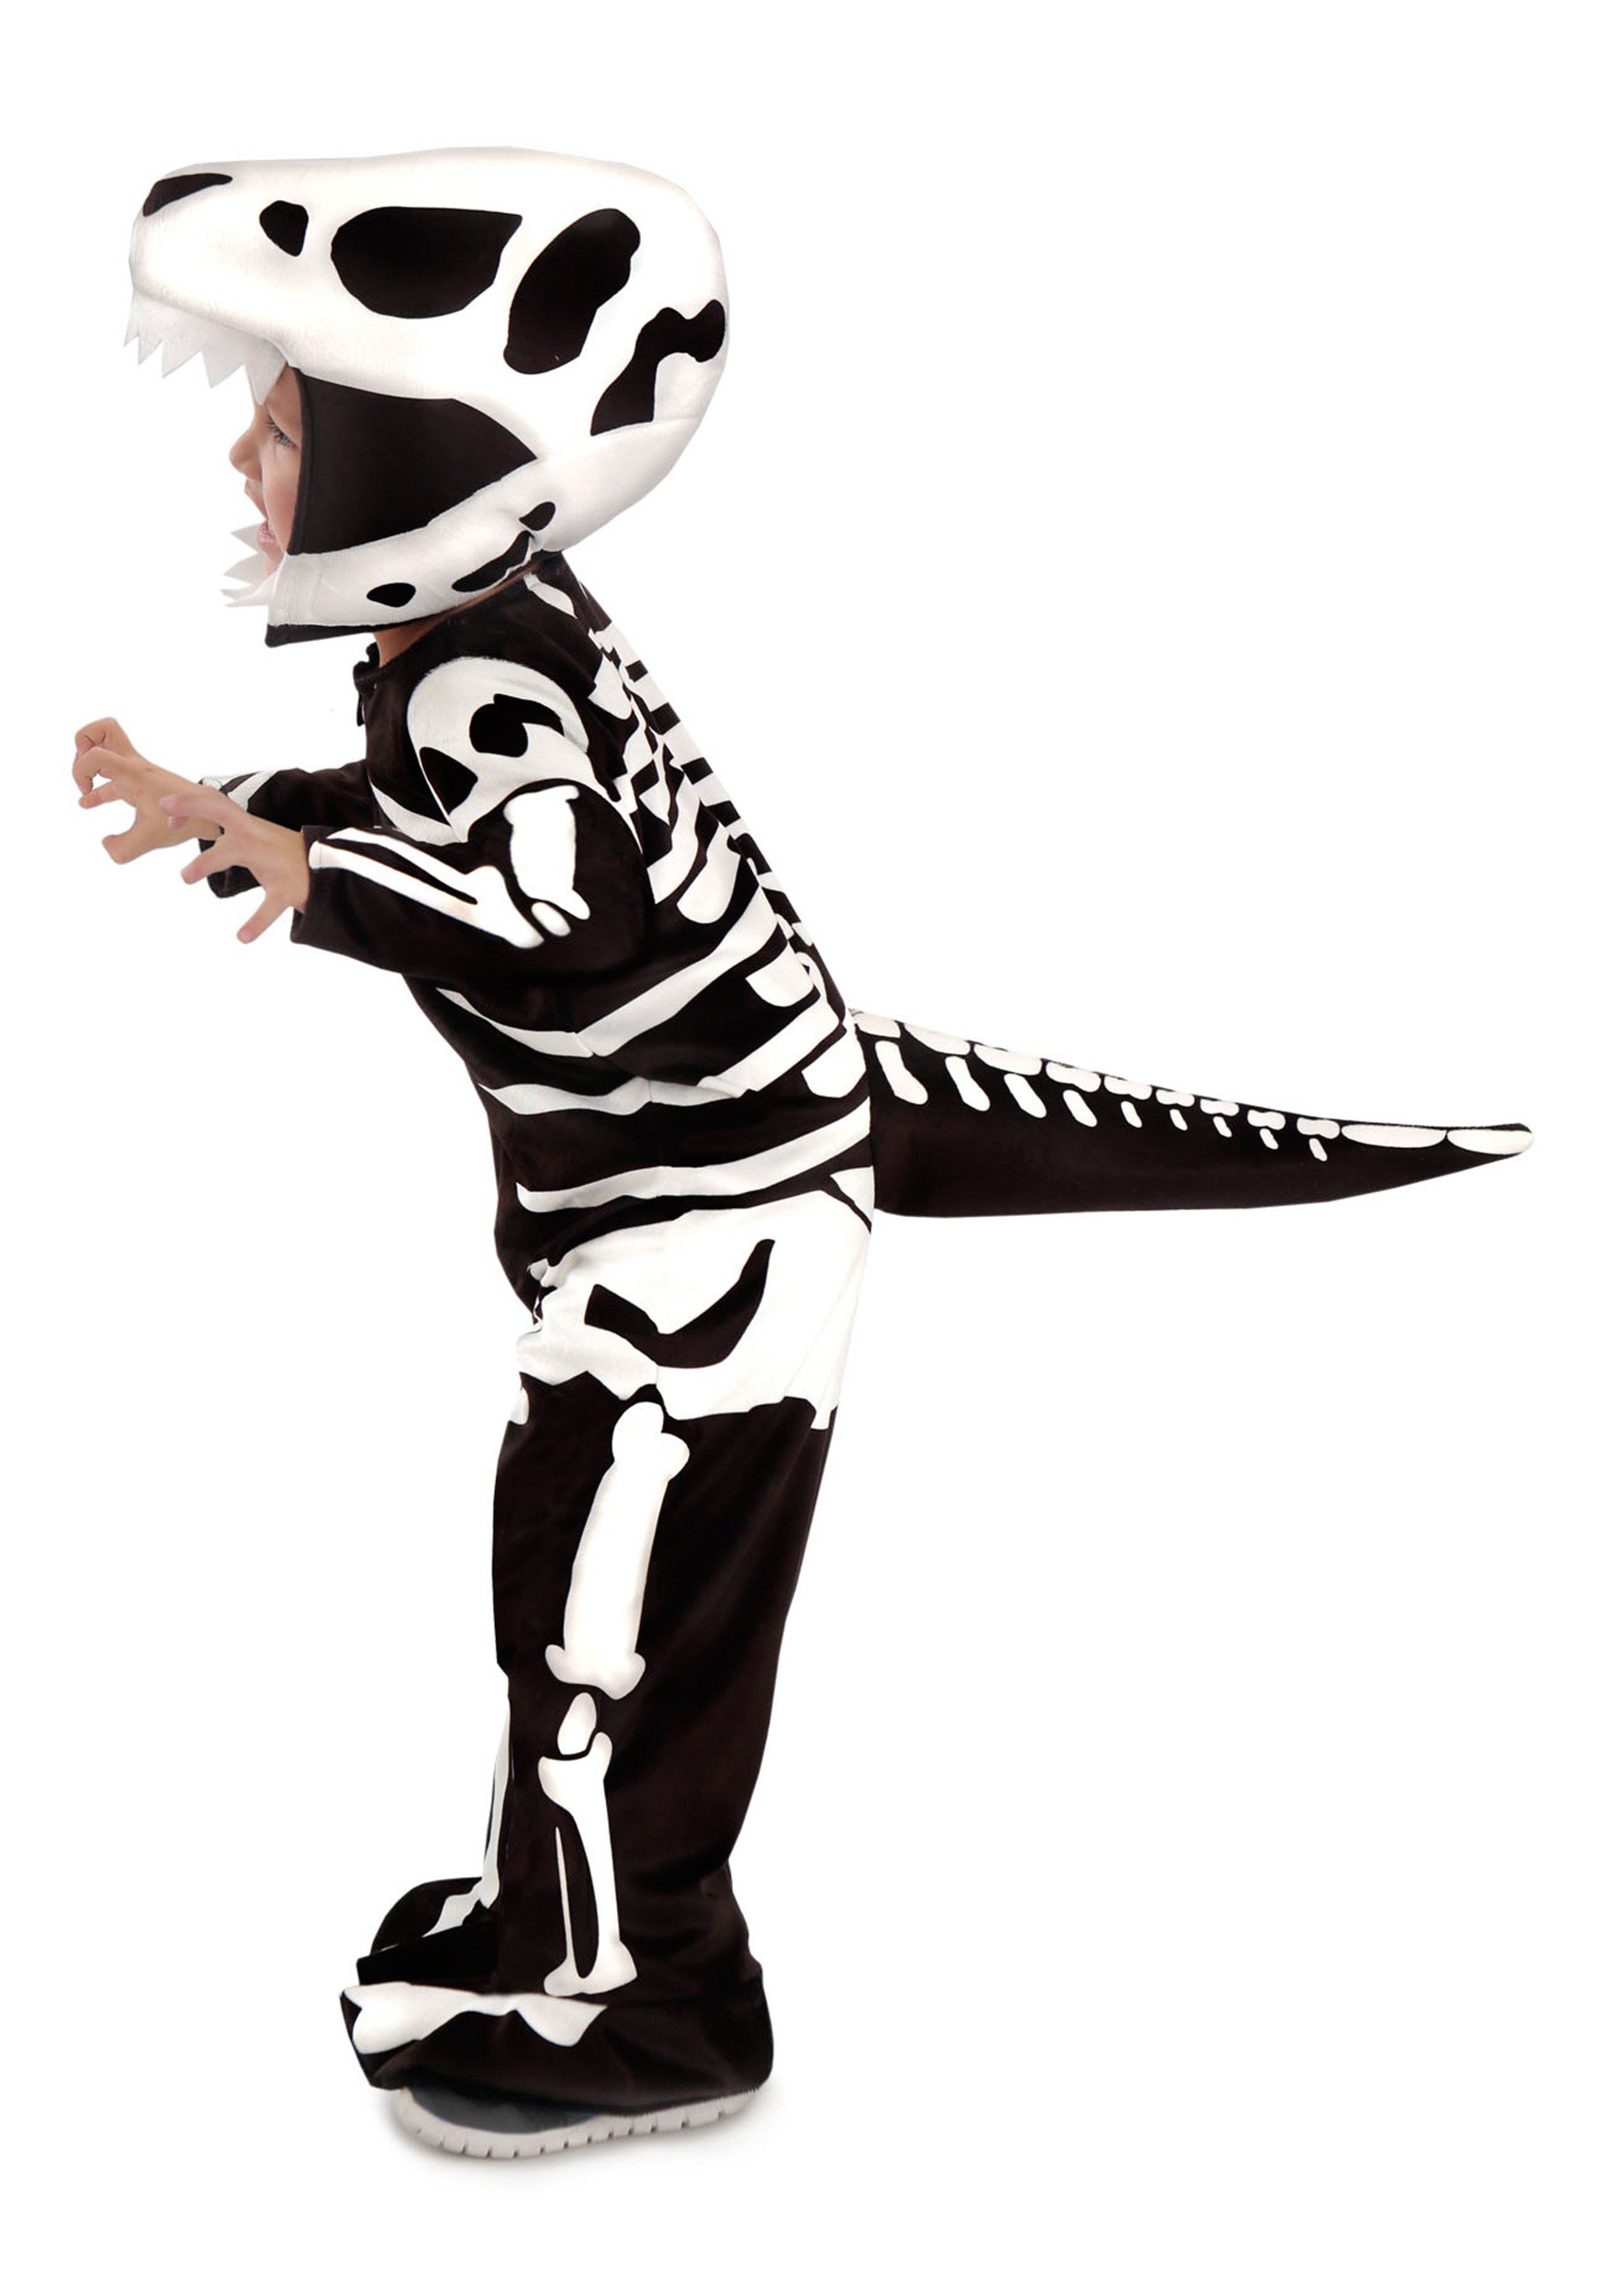 T-Rex Skeleton Costume Halloween Scary Boys Childrens Fancy Dress Outfit